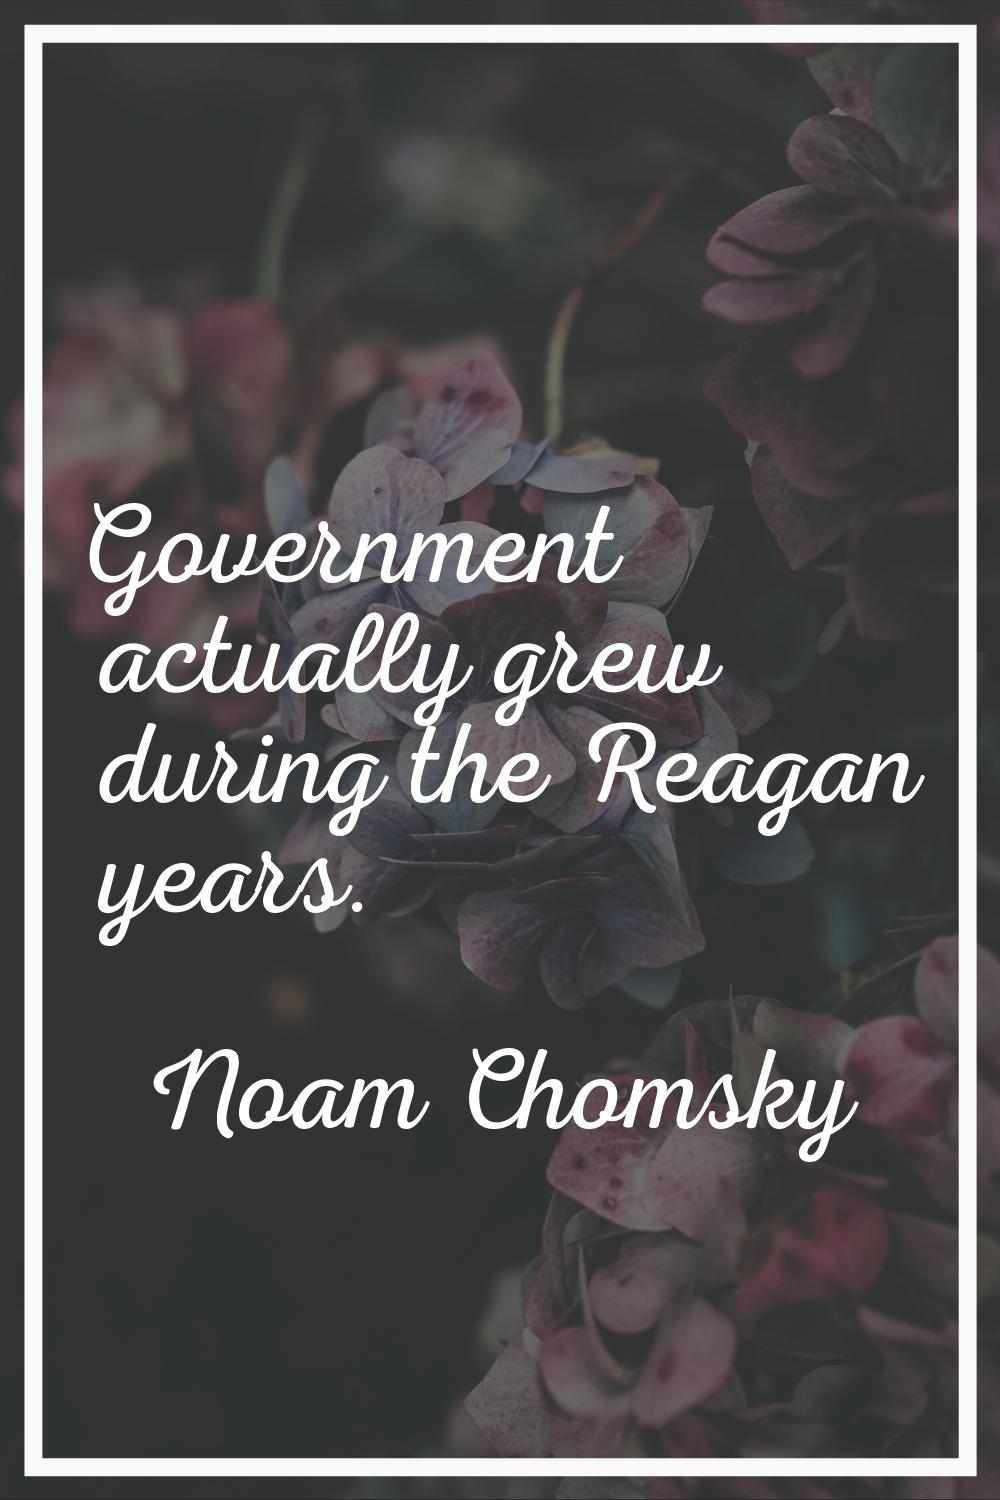 Government actually grew during the Reagan years.